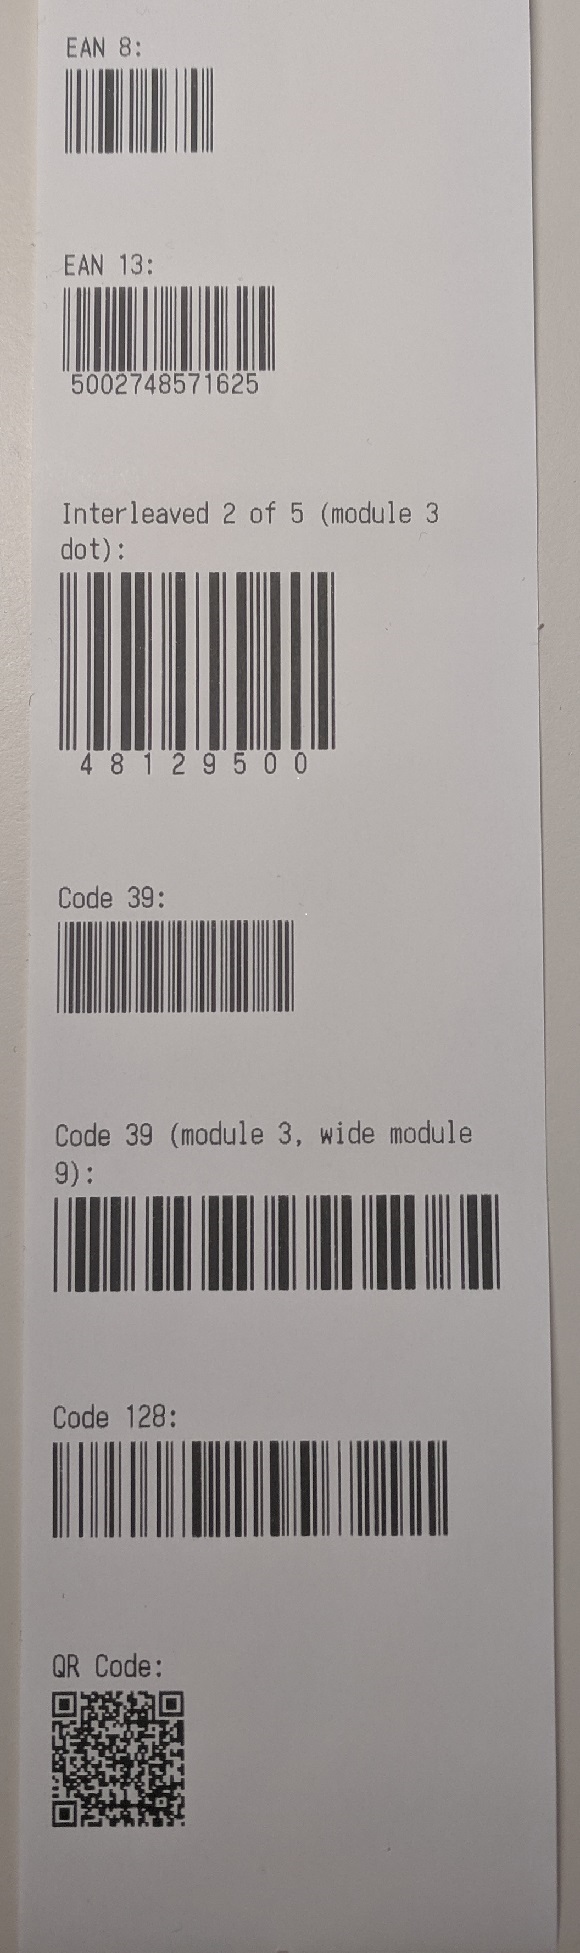 ../../_images/barcodes_58mm.jpg